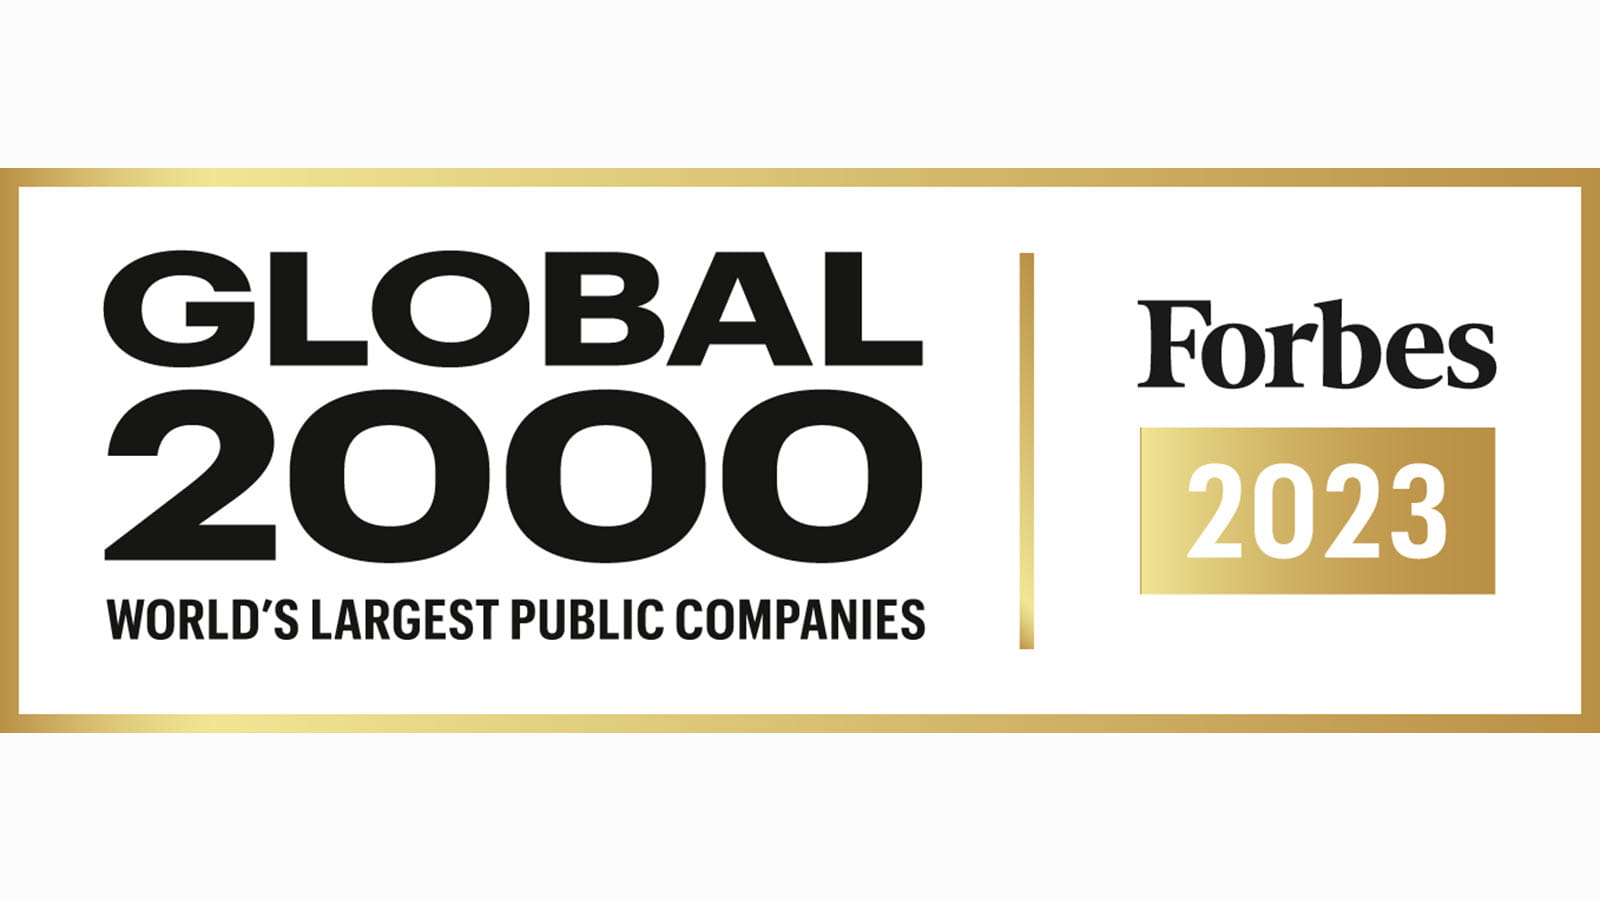 Global 2000 World's Largest Public Companies Forbes 2023